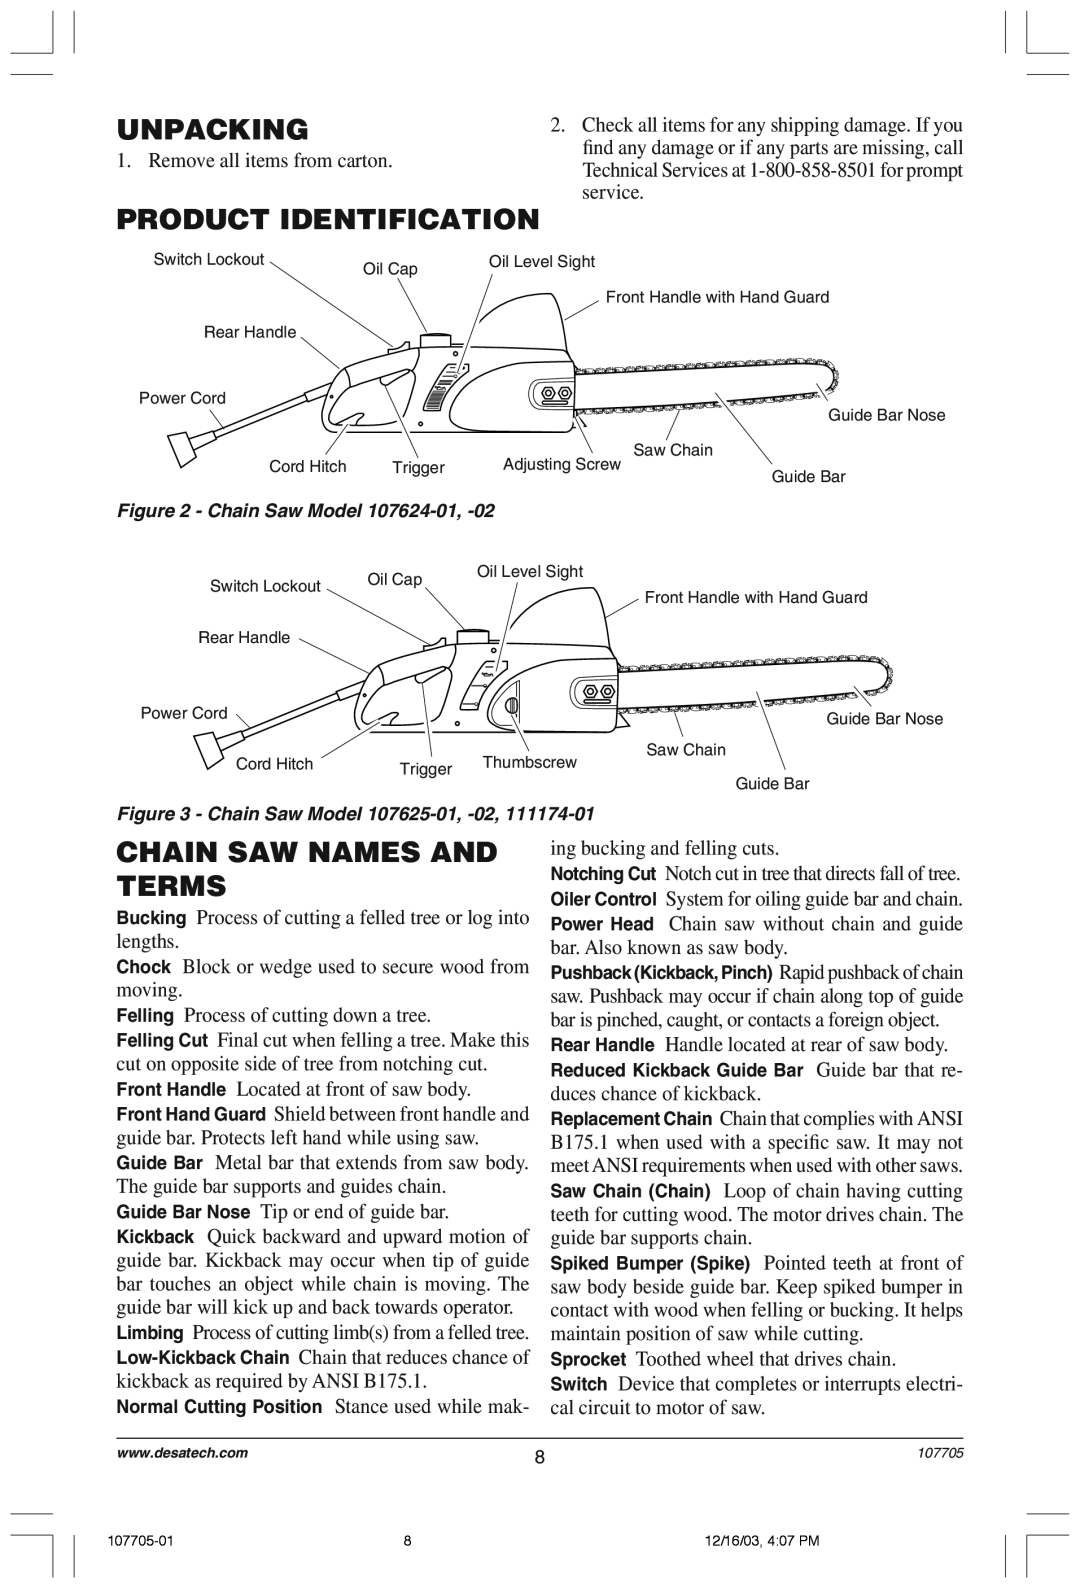 Desa 107624-01 owner manual Unpacking, Product Identification, Chain Saw Names And Terms 